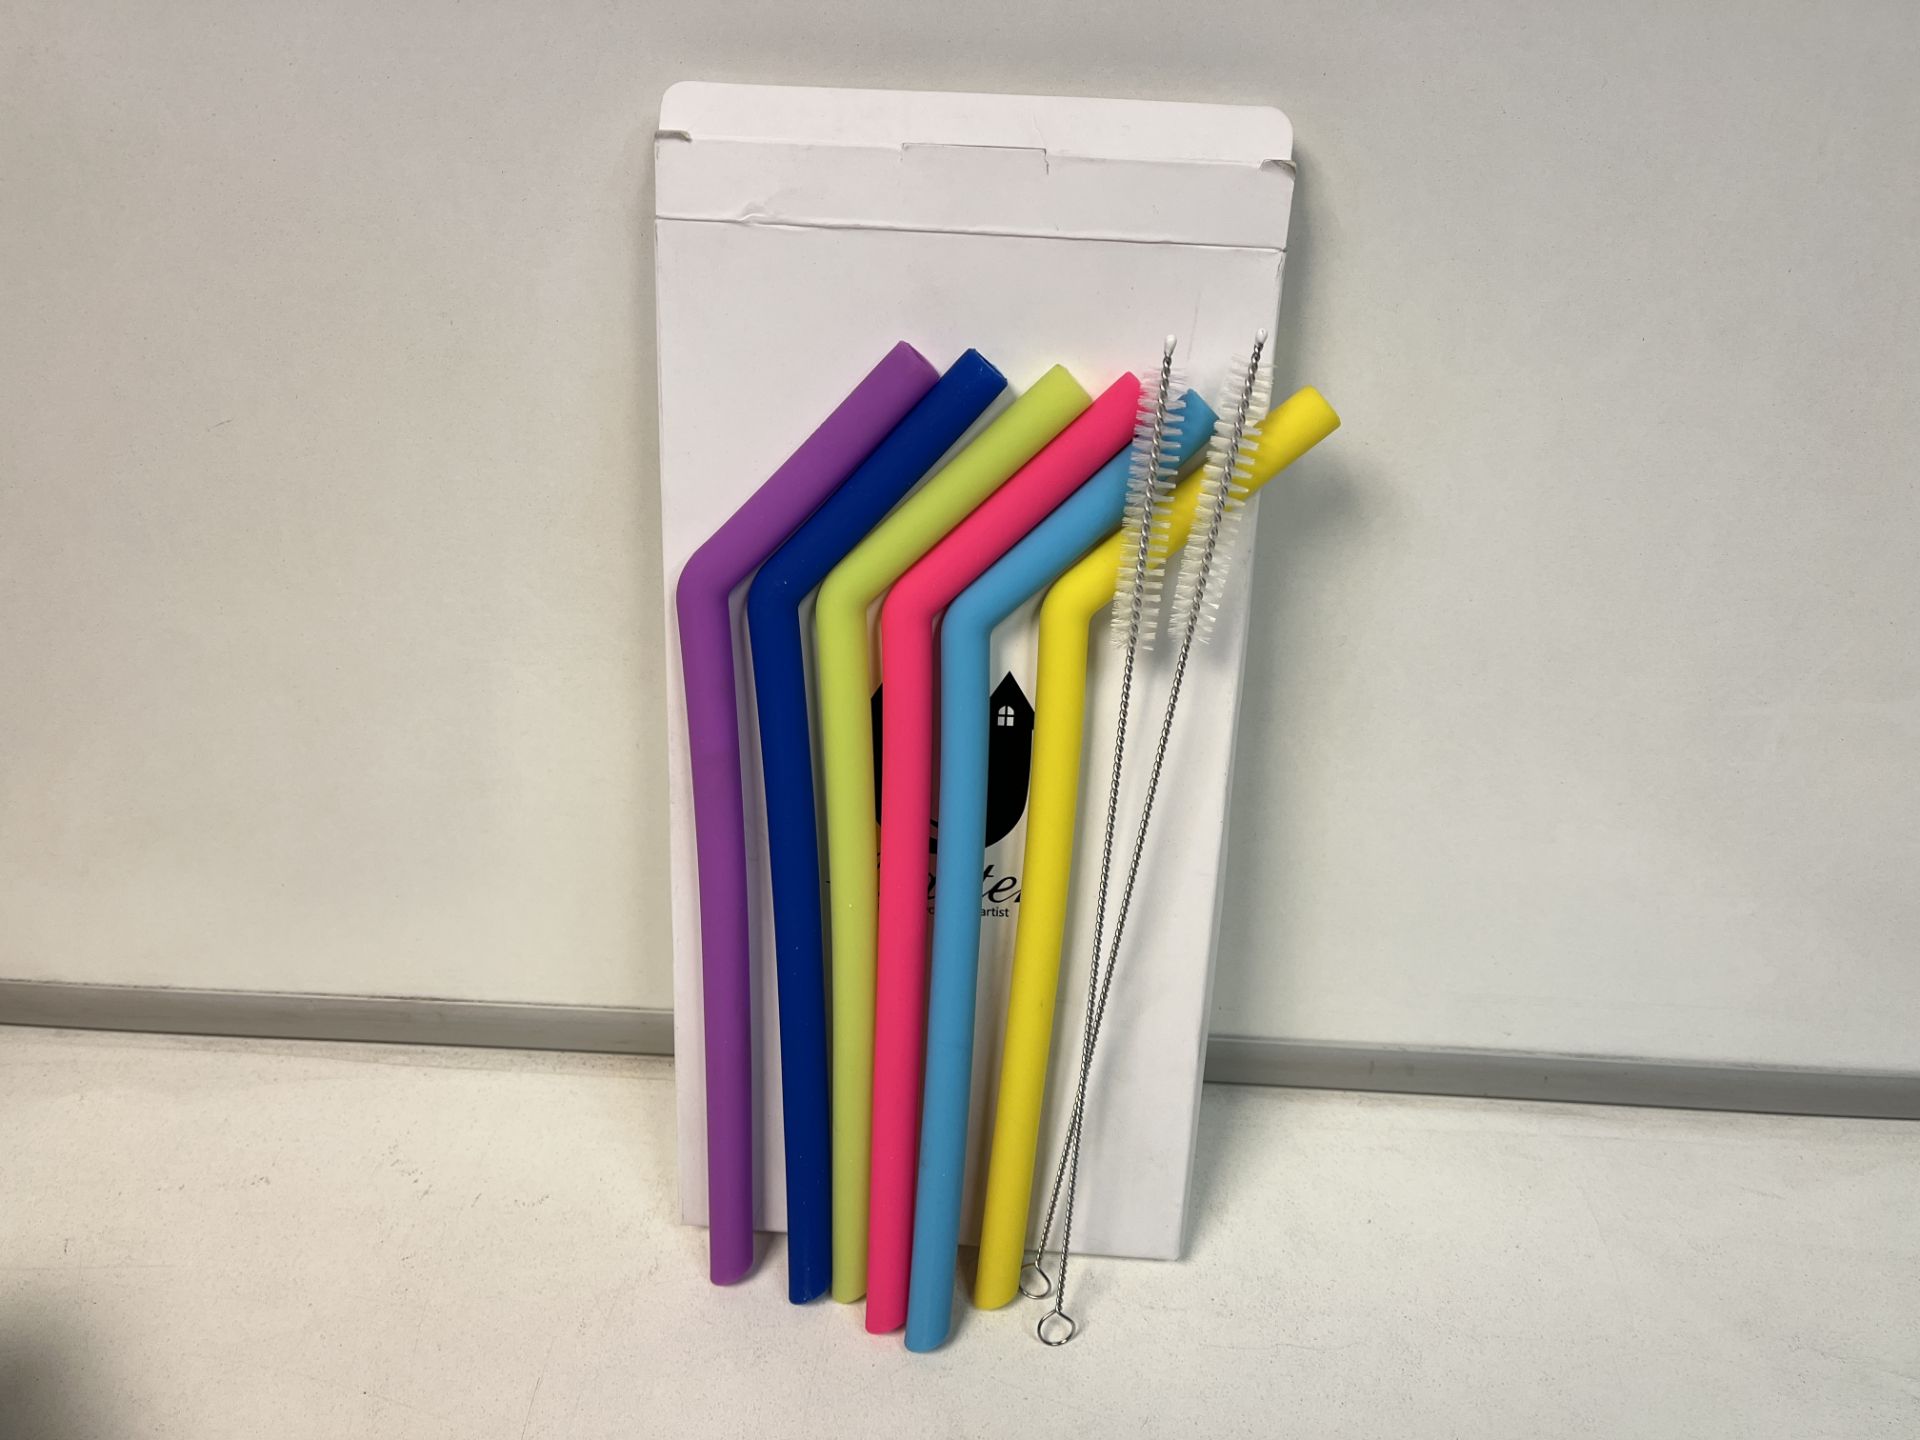 30 X BRAND NEW PACKS OF 6 ASSORTED LARGE SILICONE STRAWS WITH CLEANING BRUSHES S1P